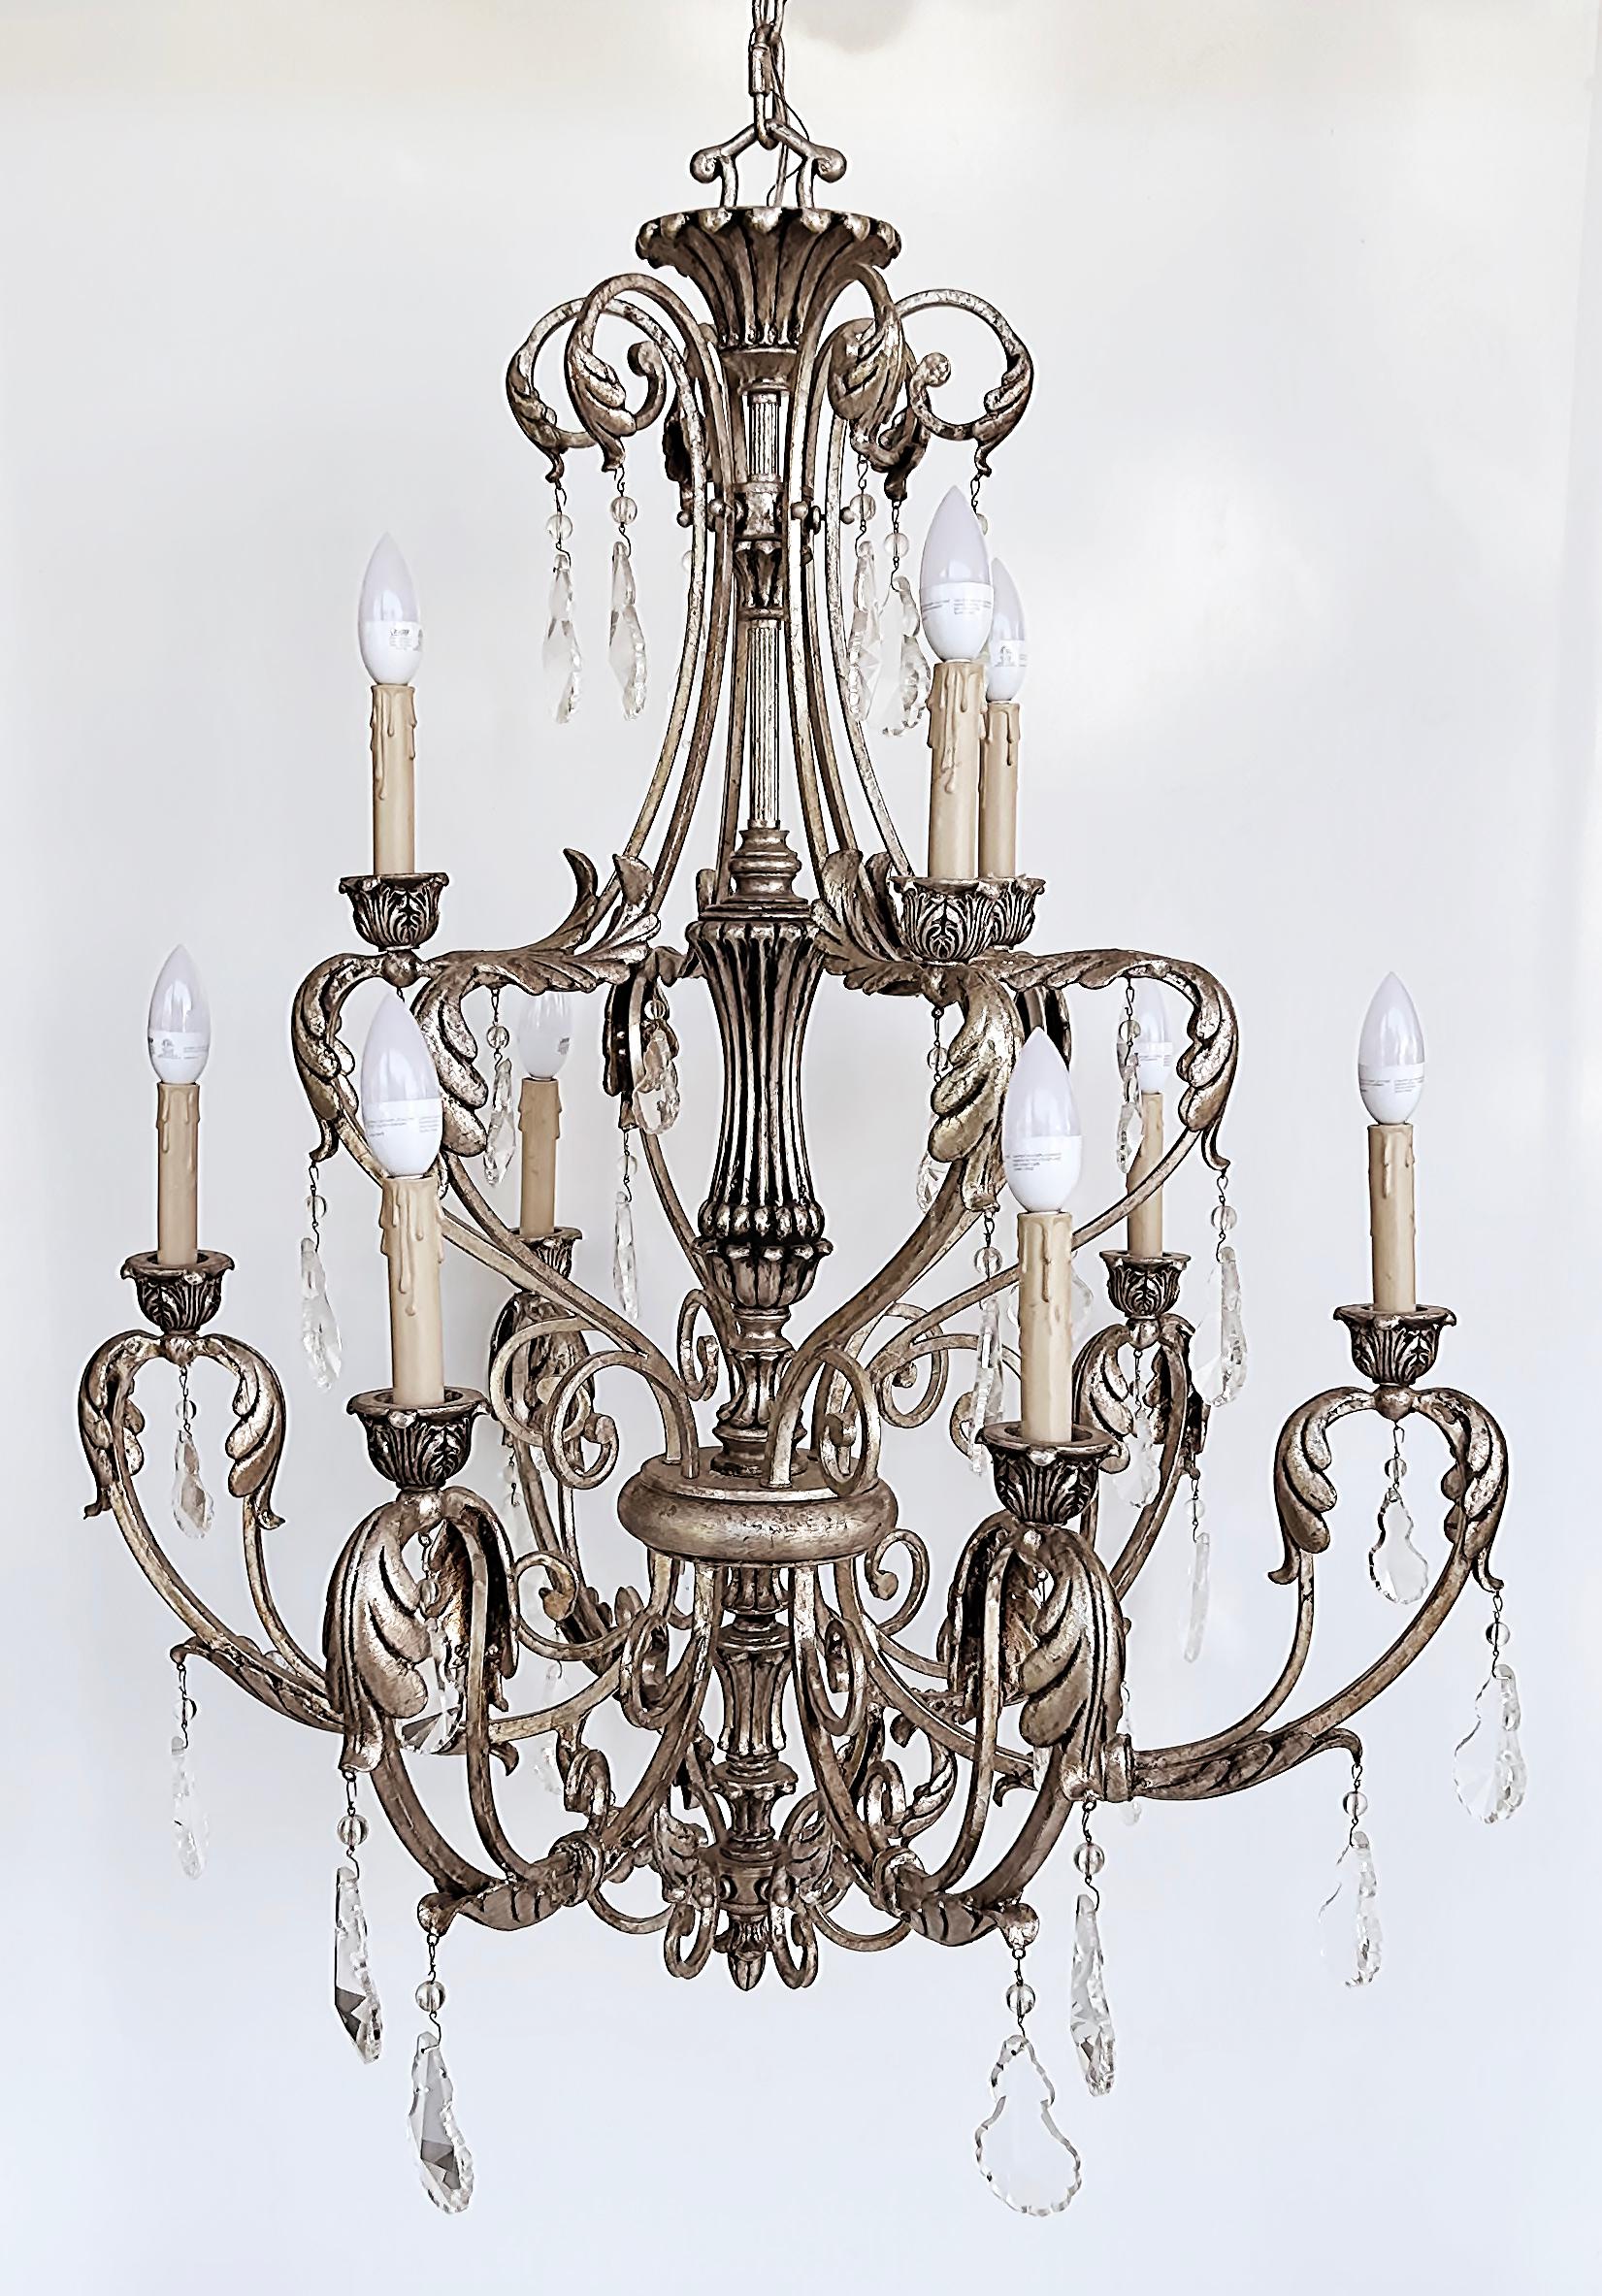 Silvered Wrought Iron Crystal 9 Arm Chandelier, Original Canopy

Offered for sale is a silver leaf wrought iron chandelier with nine arms and crystals. The chandelier is a recent find from a Miami Beach waterfront island home. The large scale of